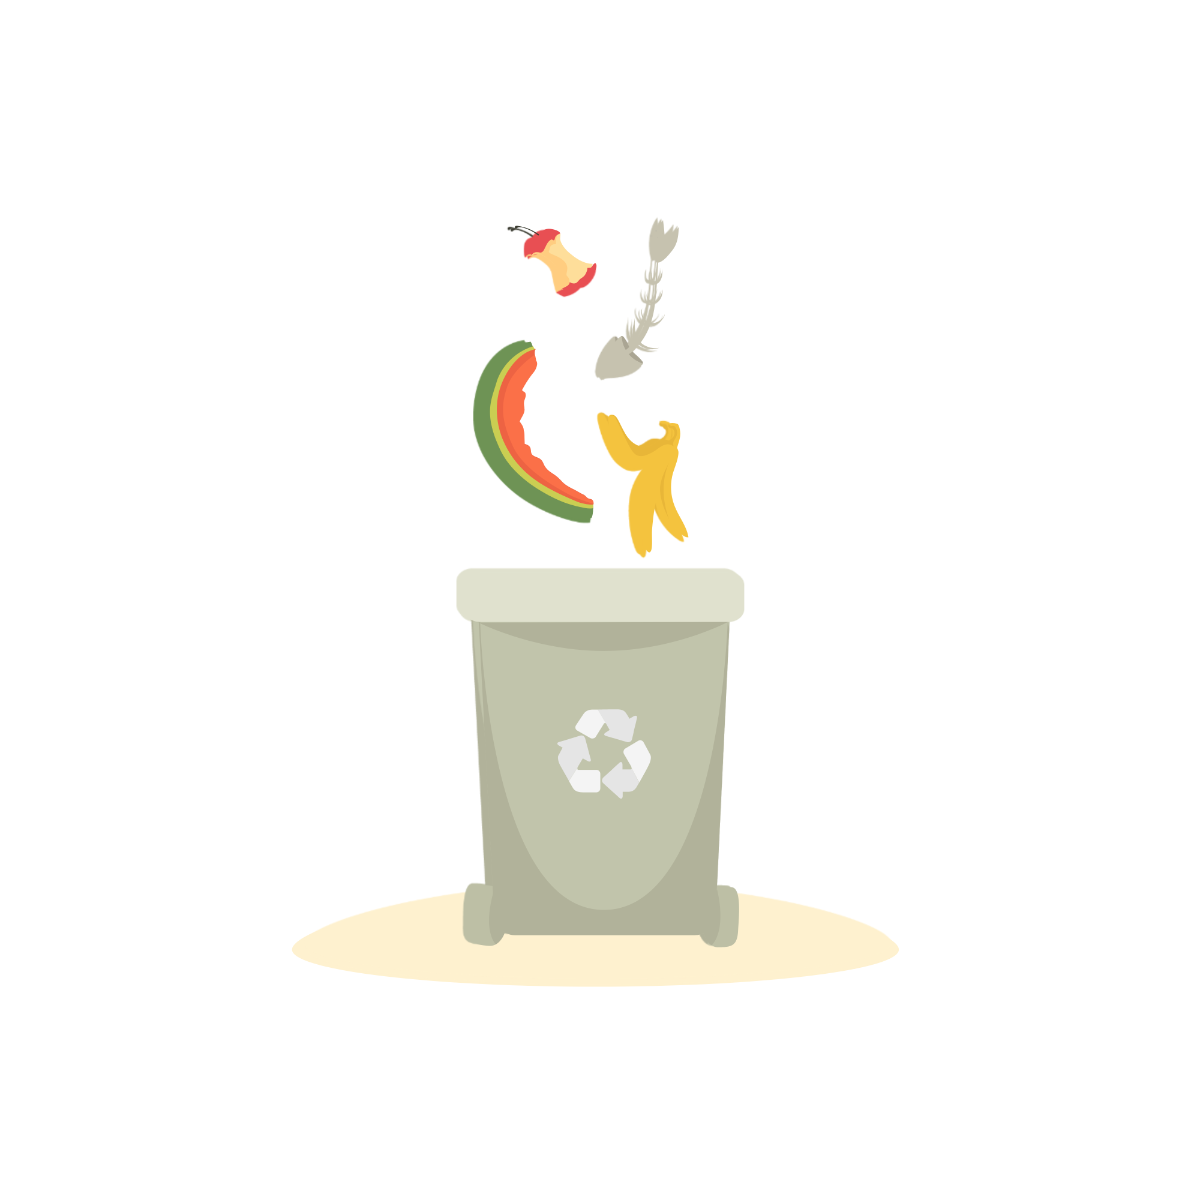 Recycle Waste Vector